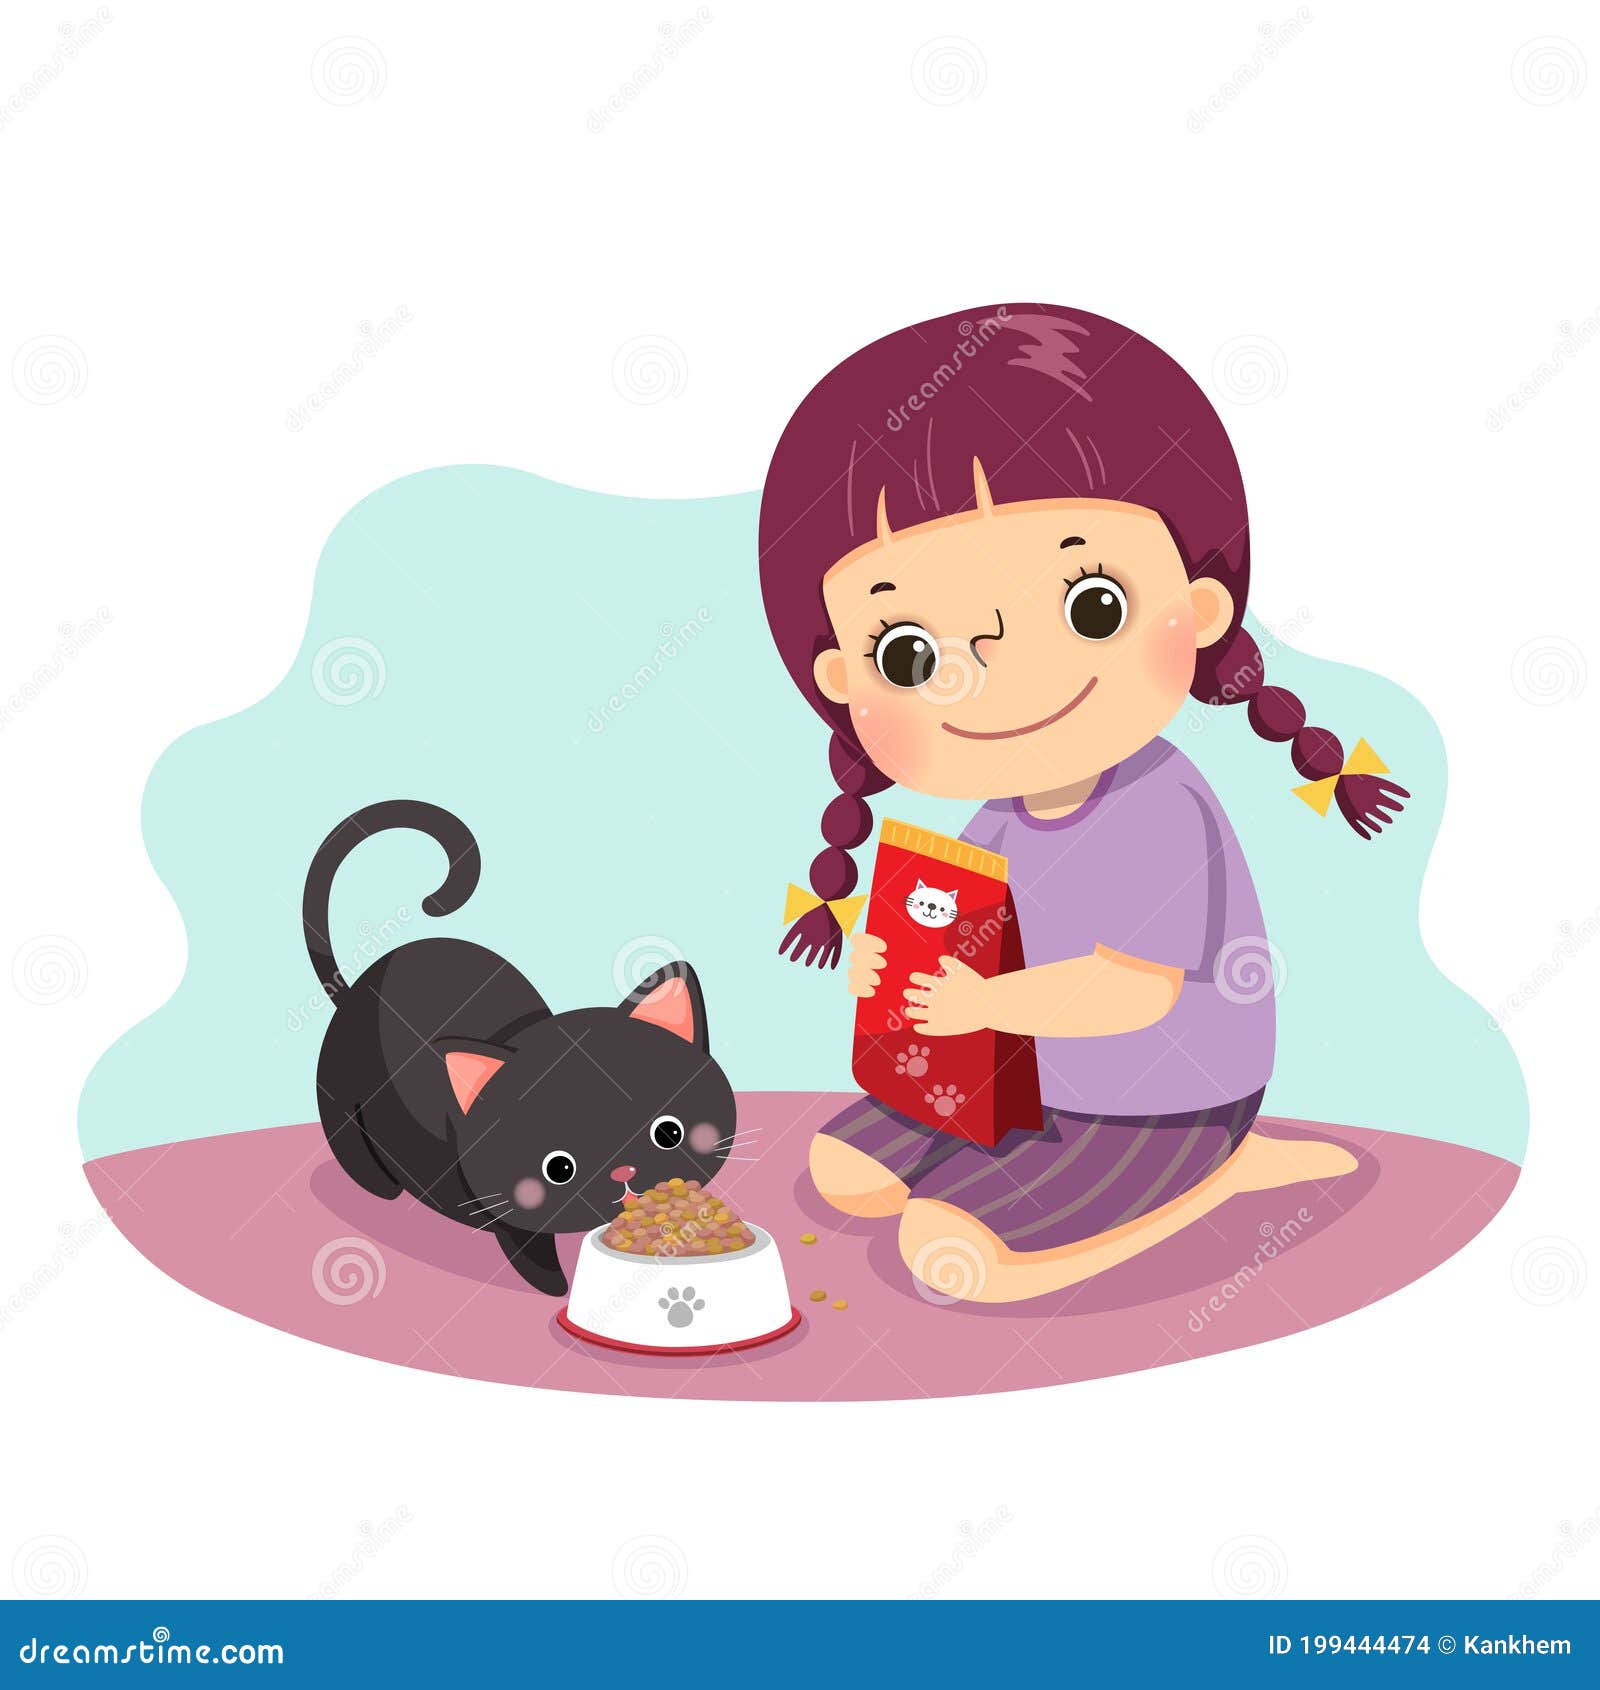 cartoon of a little girl feeding her cat at home. kids doing housework chores at home concept